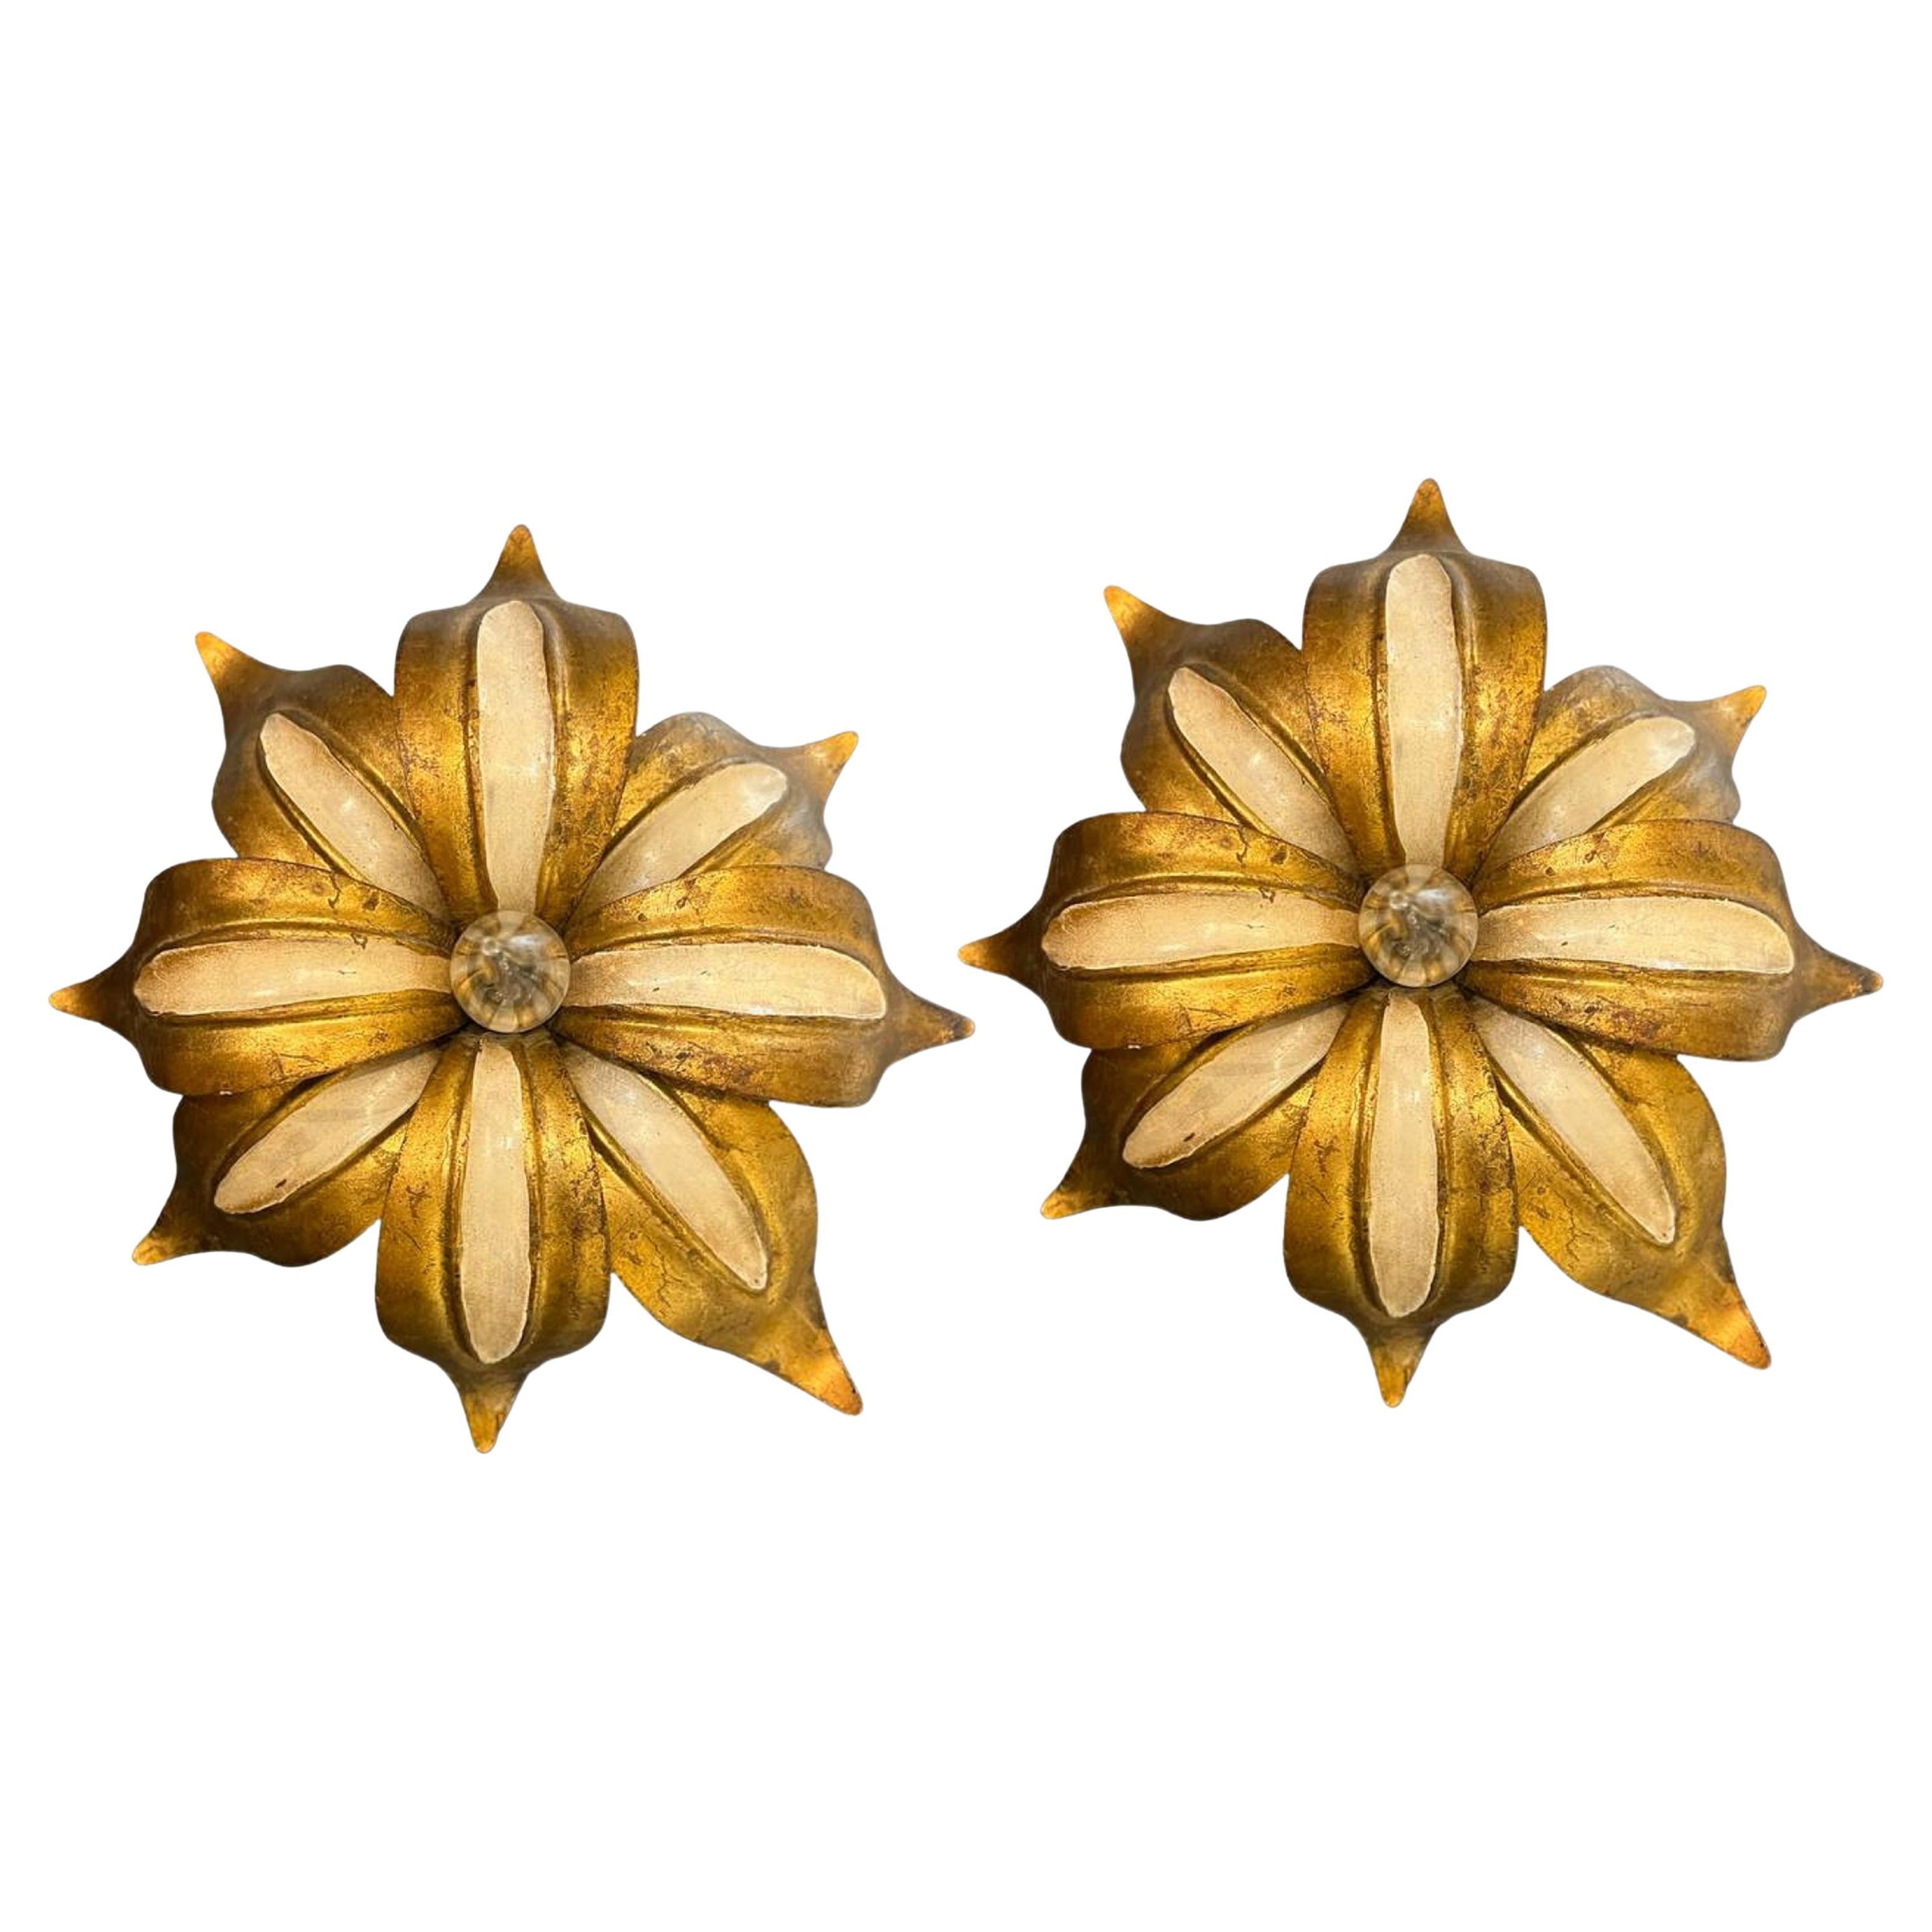 1930's Gold and White Italian Flower Sconces